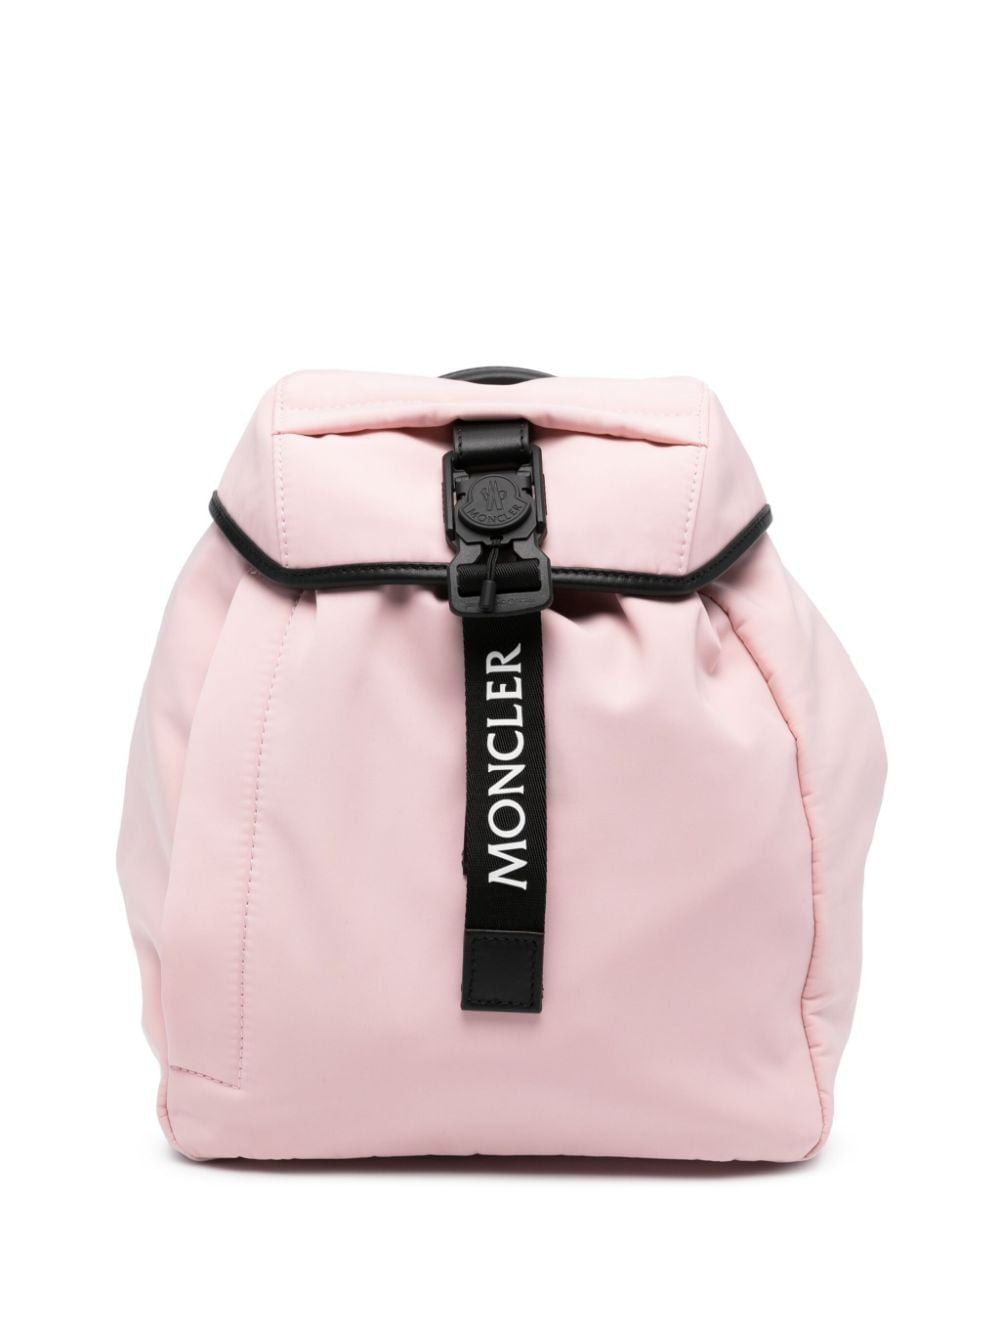 MONCLER Maroon Backpack for Women - Stylish and Functional